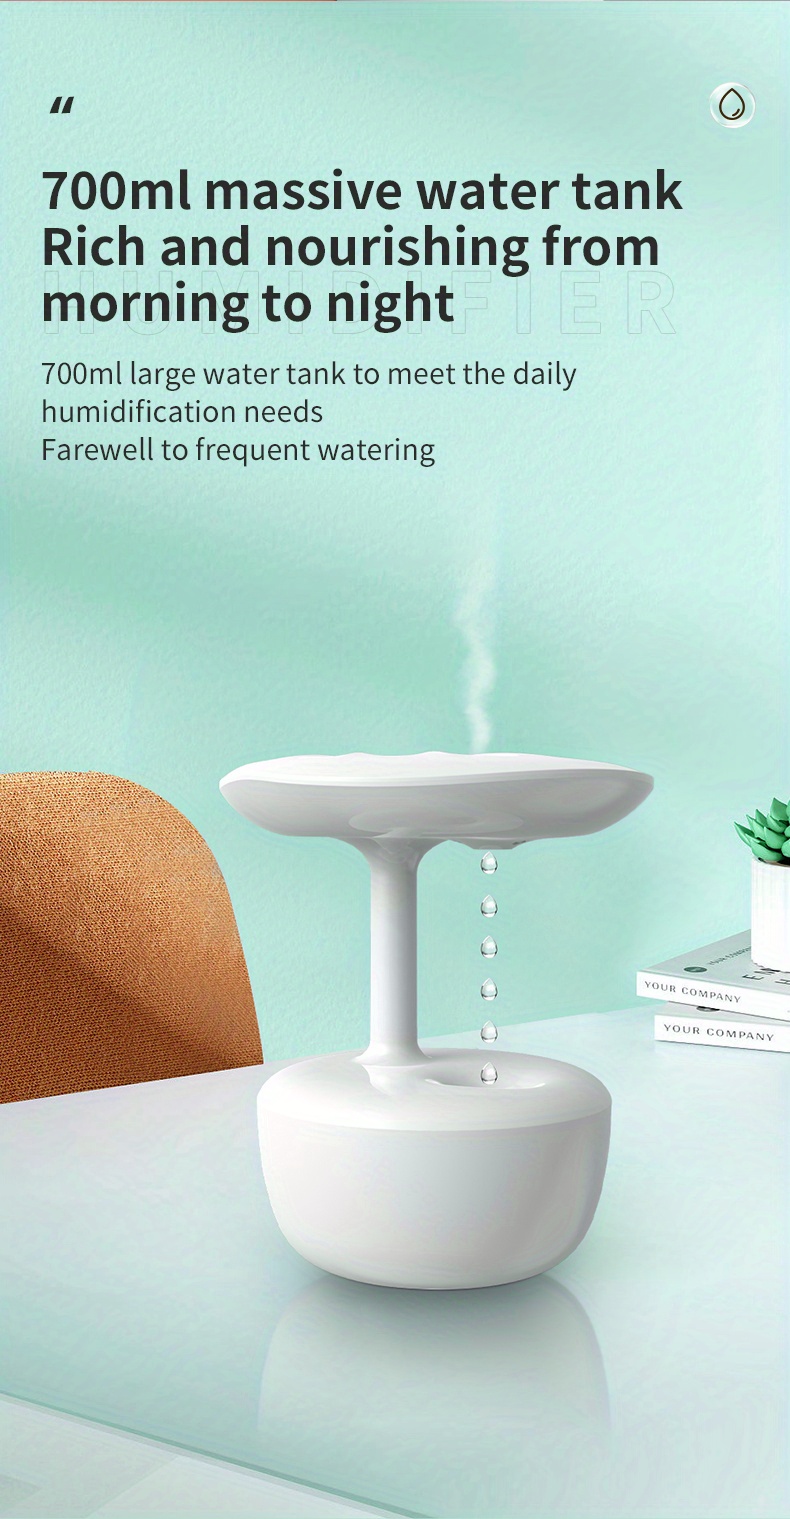 anti gravity water drop humidifier 700ml large capacity smart spray humidifier keep the air moist all day long creative water droplet back flow design automatic stop function humidifier suitable for office living room and bedroom details 9